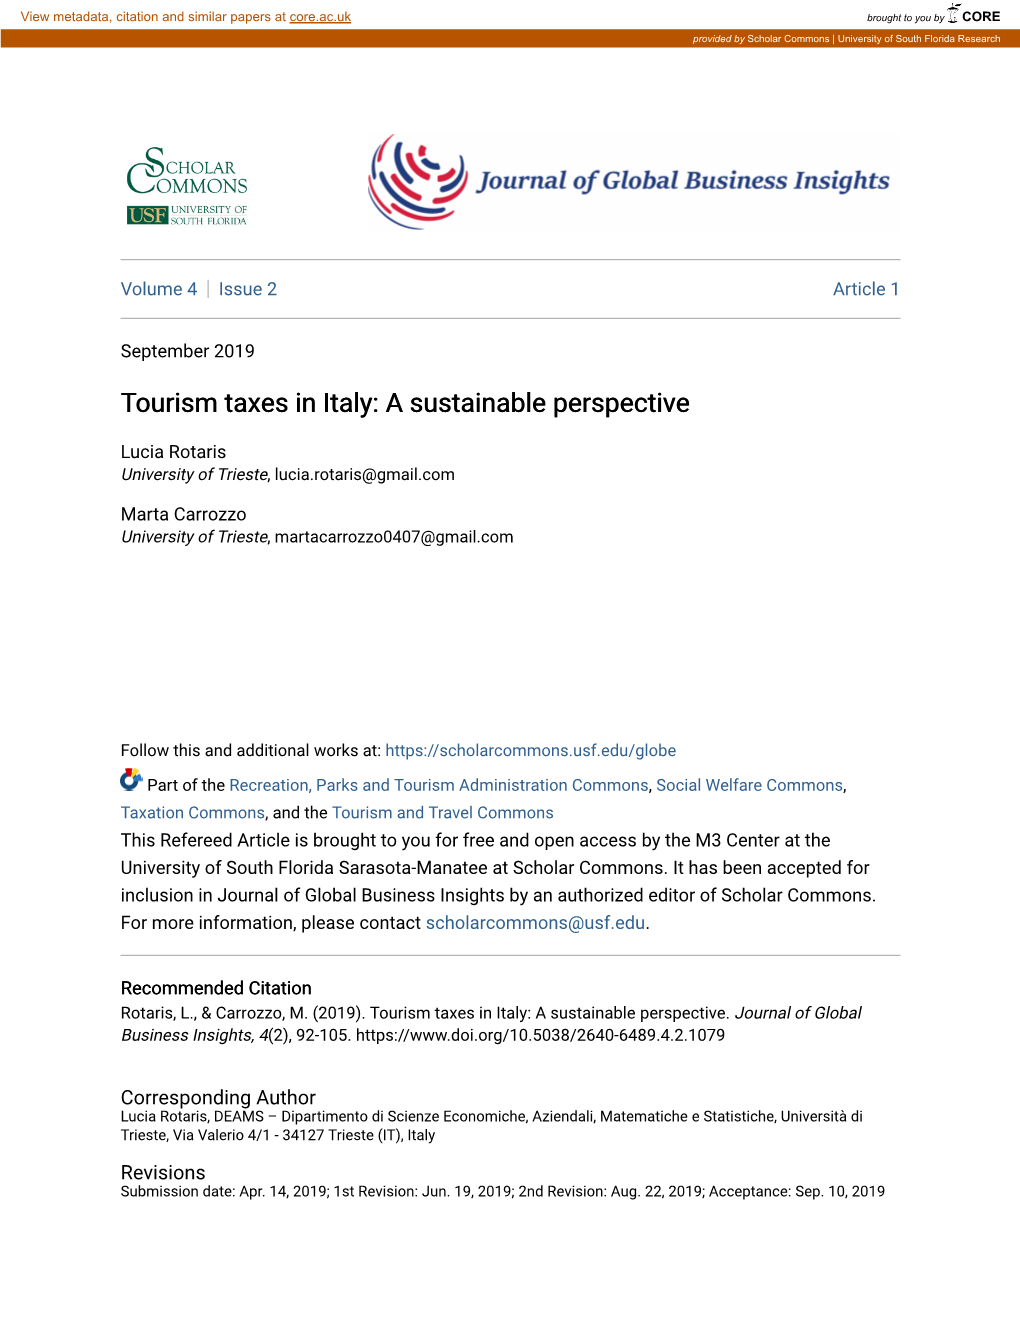 Tourism Taxes in Italy: a Sustainable Perspective